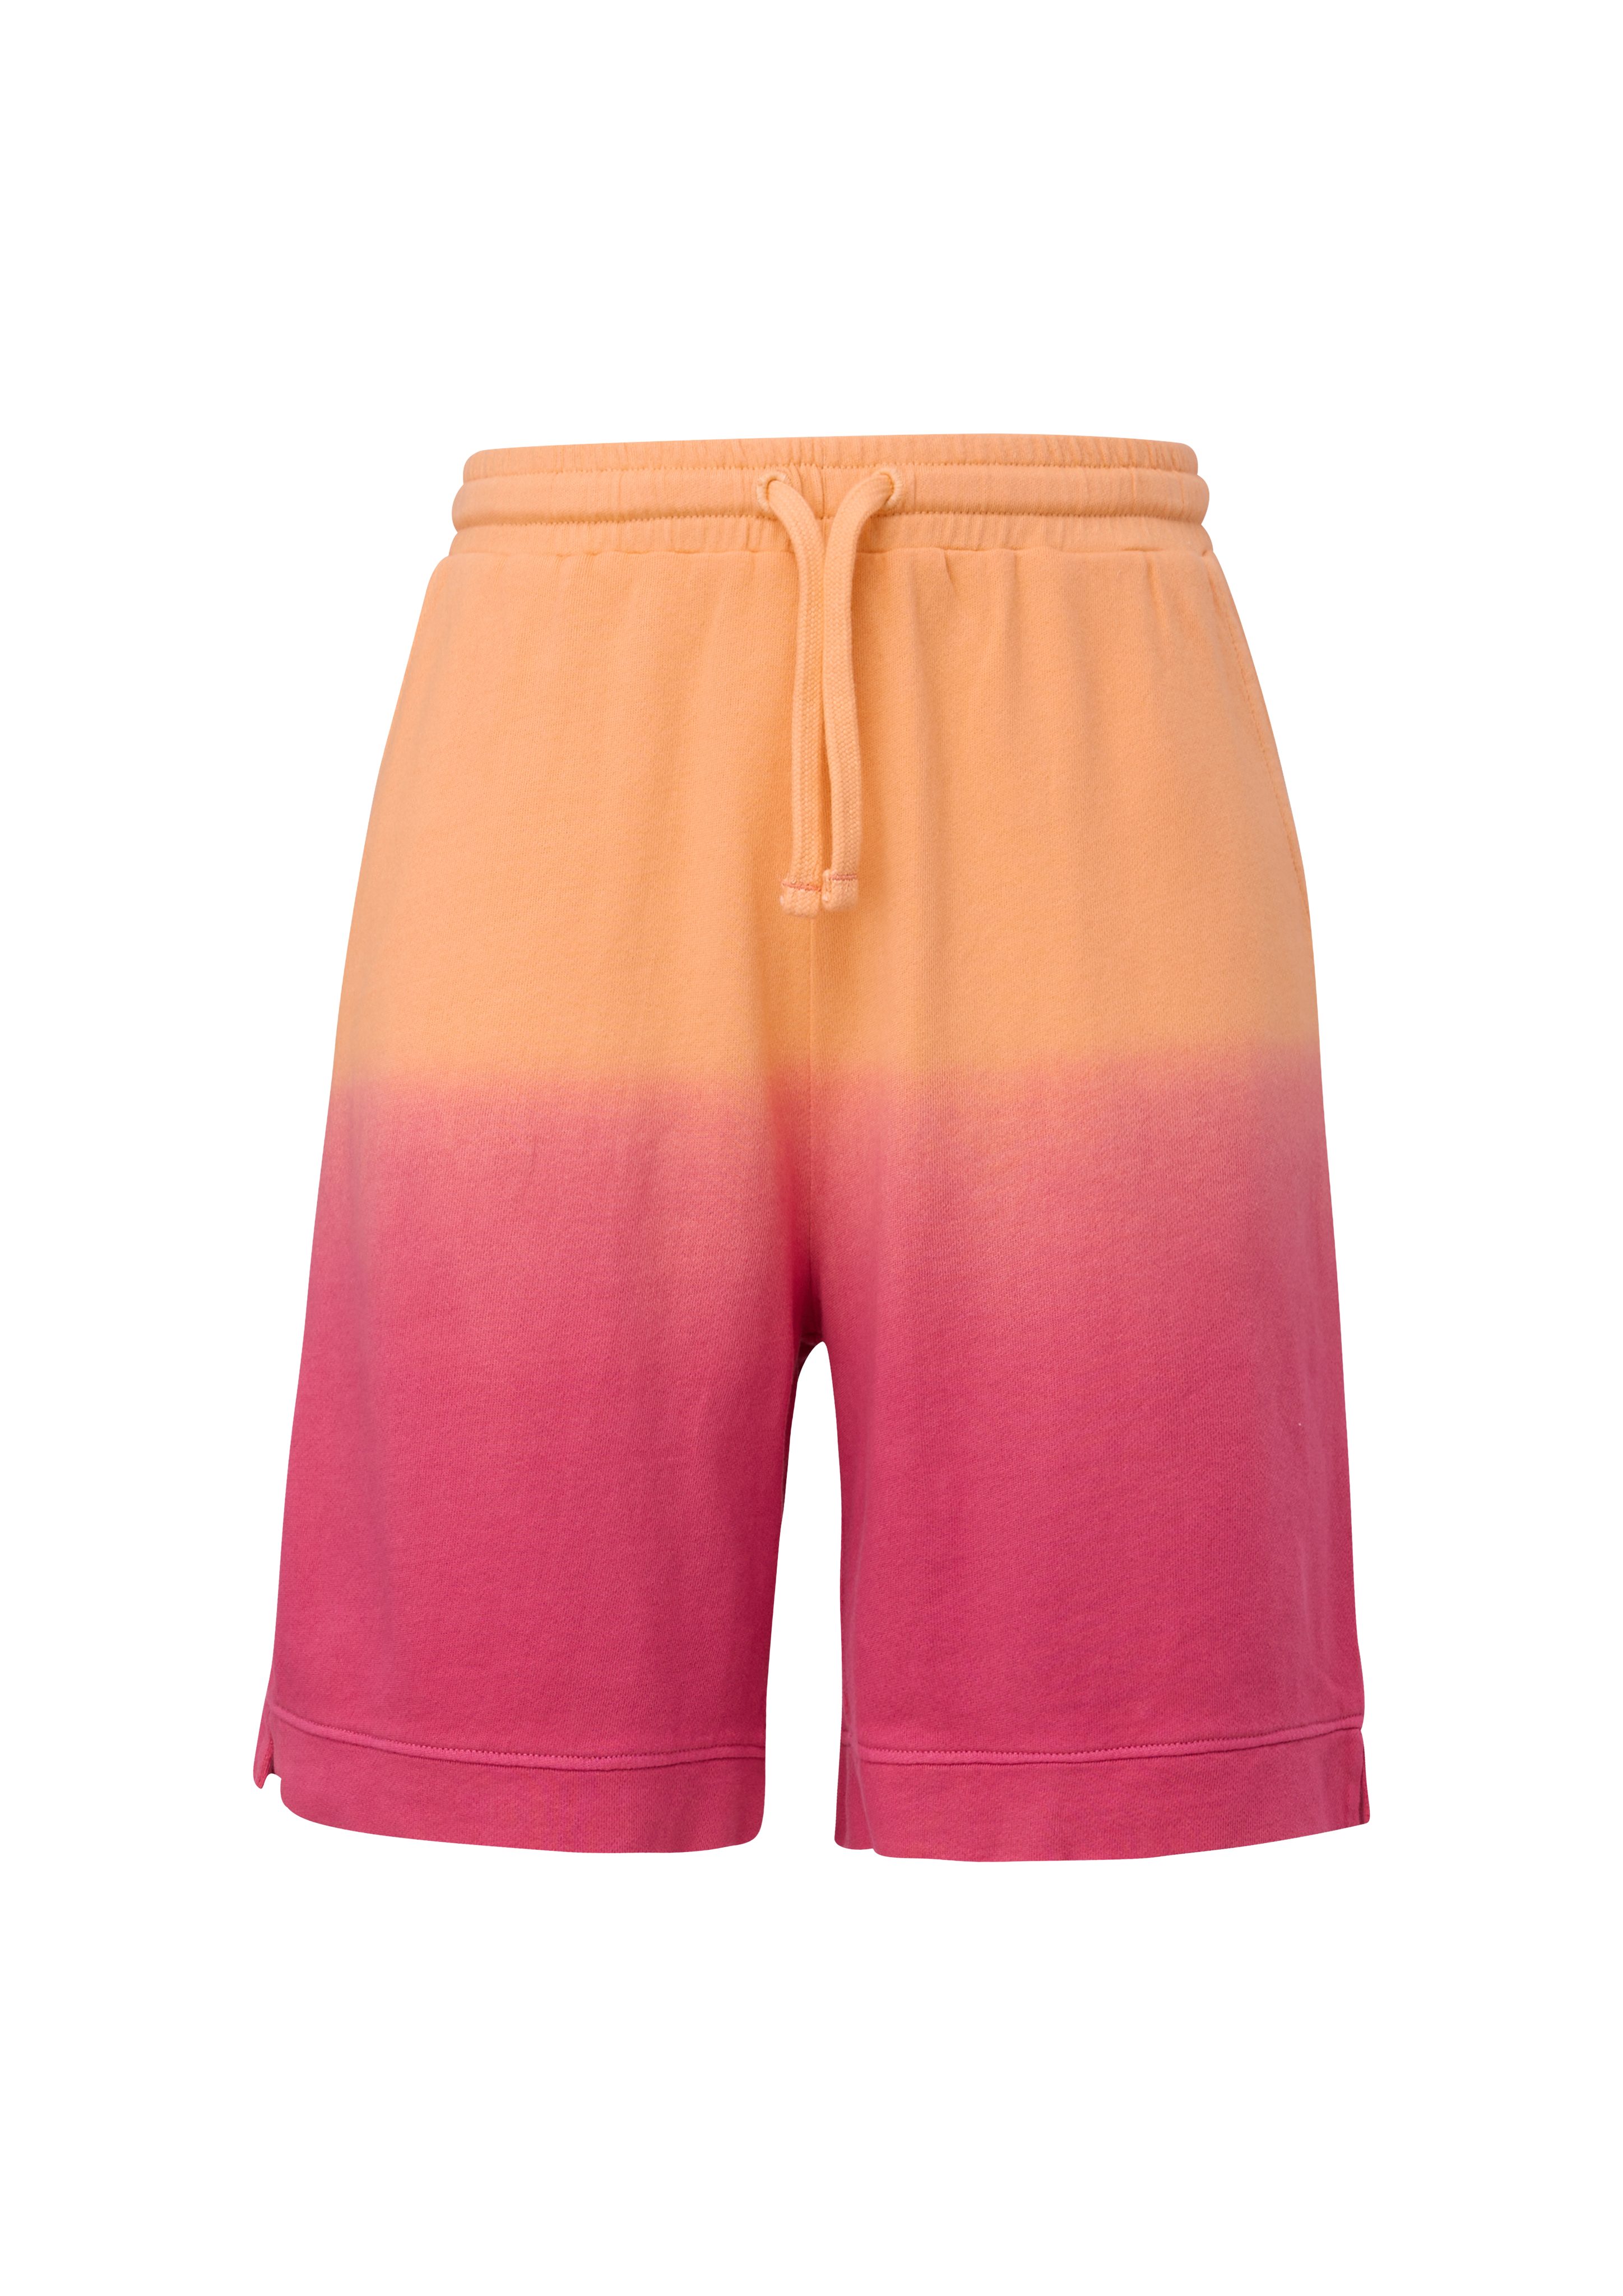 Smiley®-Print pink mit Relaxed: Shorts Sweatshorts s.Oliver